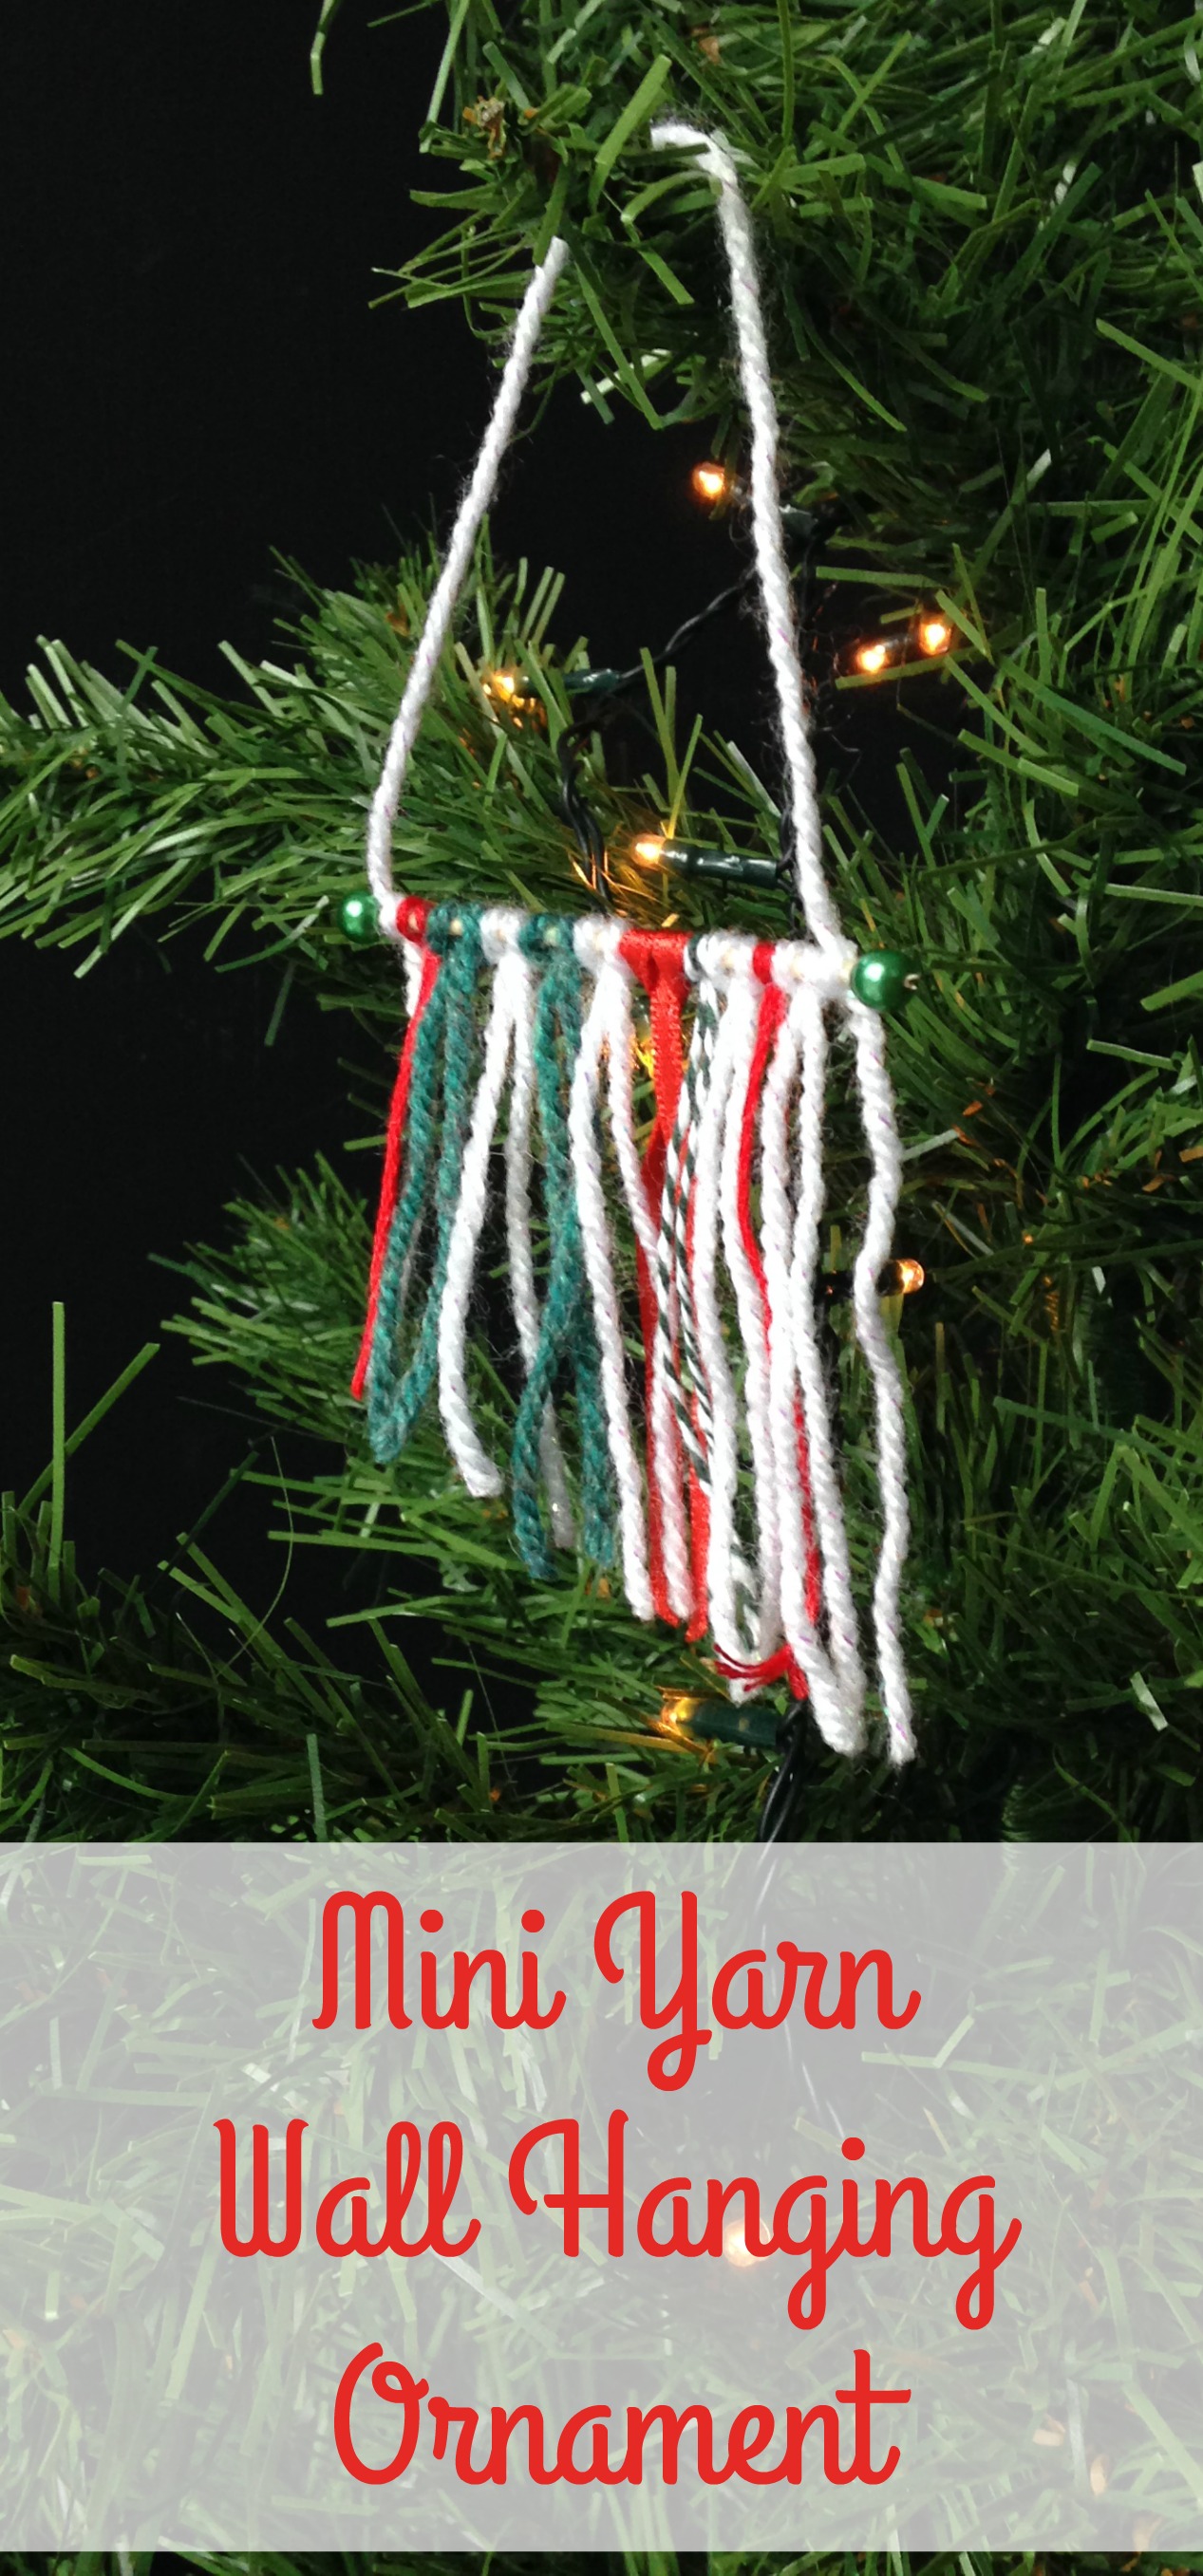 Crafting a Soft and Sparkly Blush Christmas with DIY Yarn Trees -  Celebrated Nest